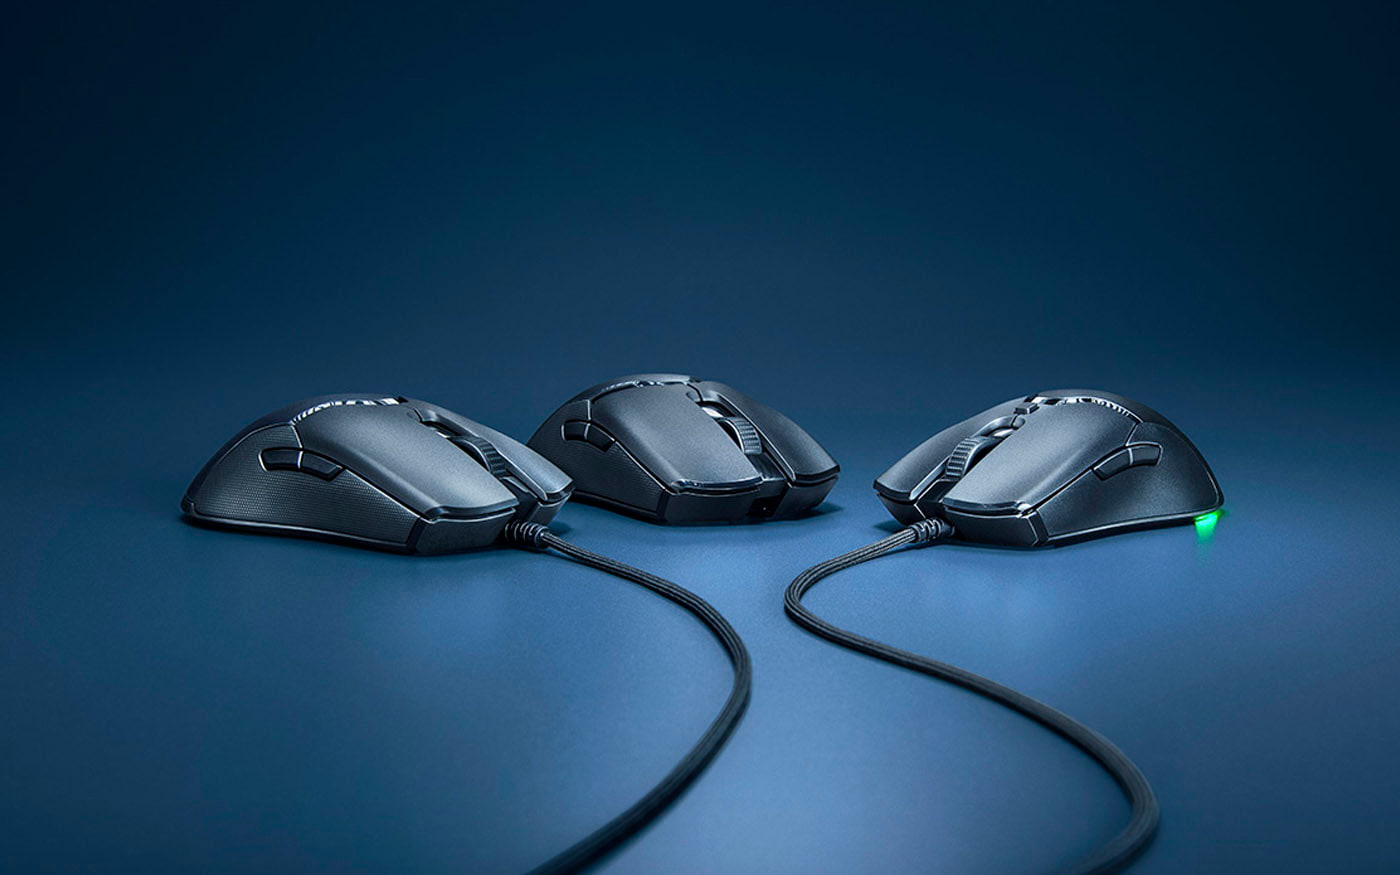 Razer launches Viper Mini mouse with optical switches for only 39USD